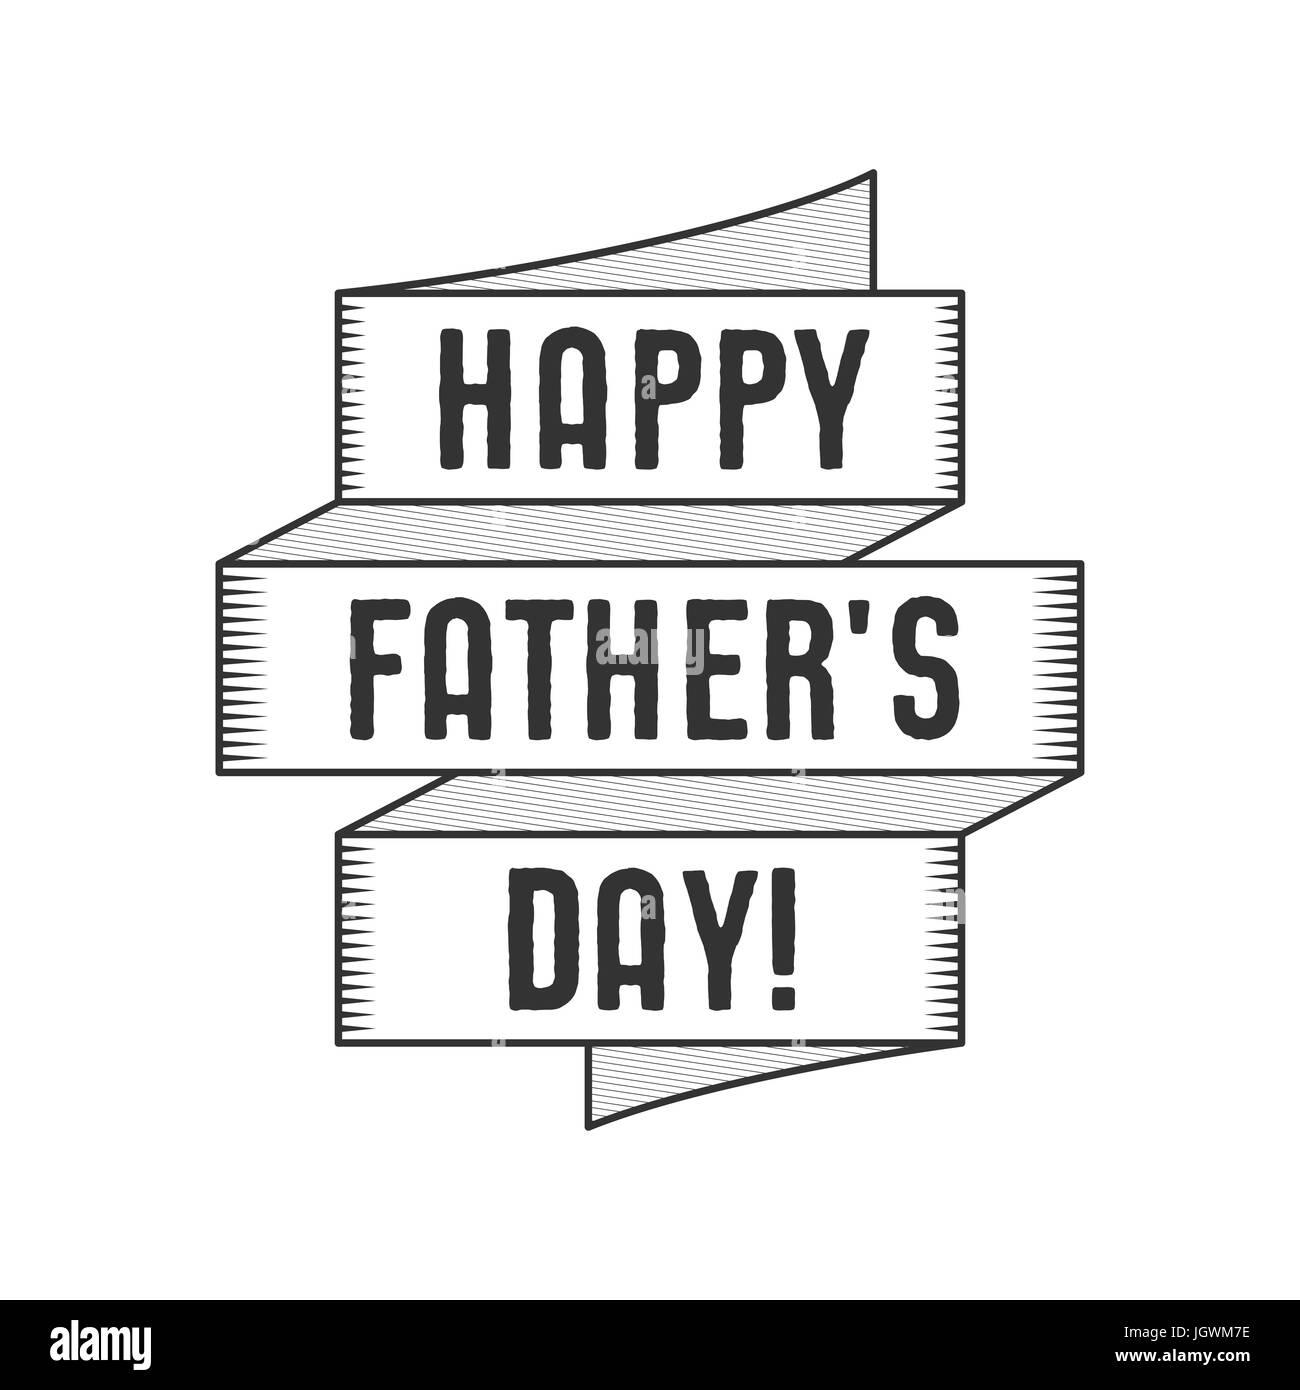 Happy Fathers Day Typography Label With Ribbon And Texts Stock Isolated On White Background Monochrome Design Stock Photo Alamy